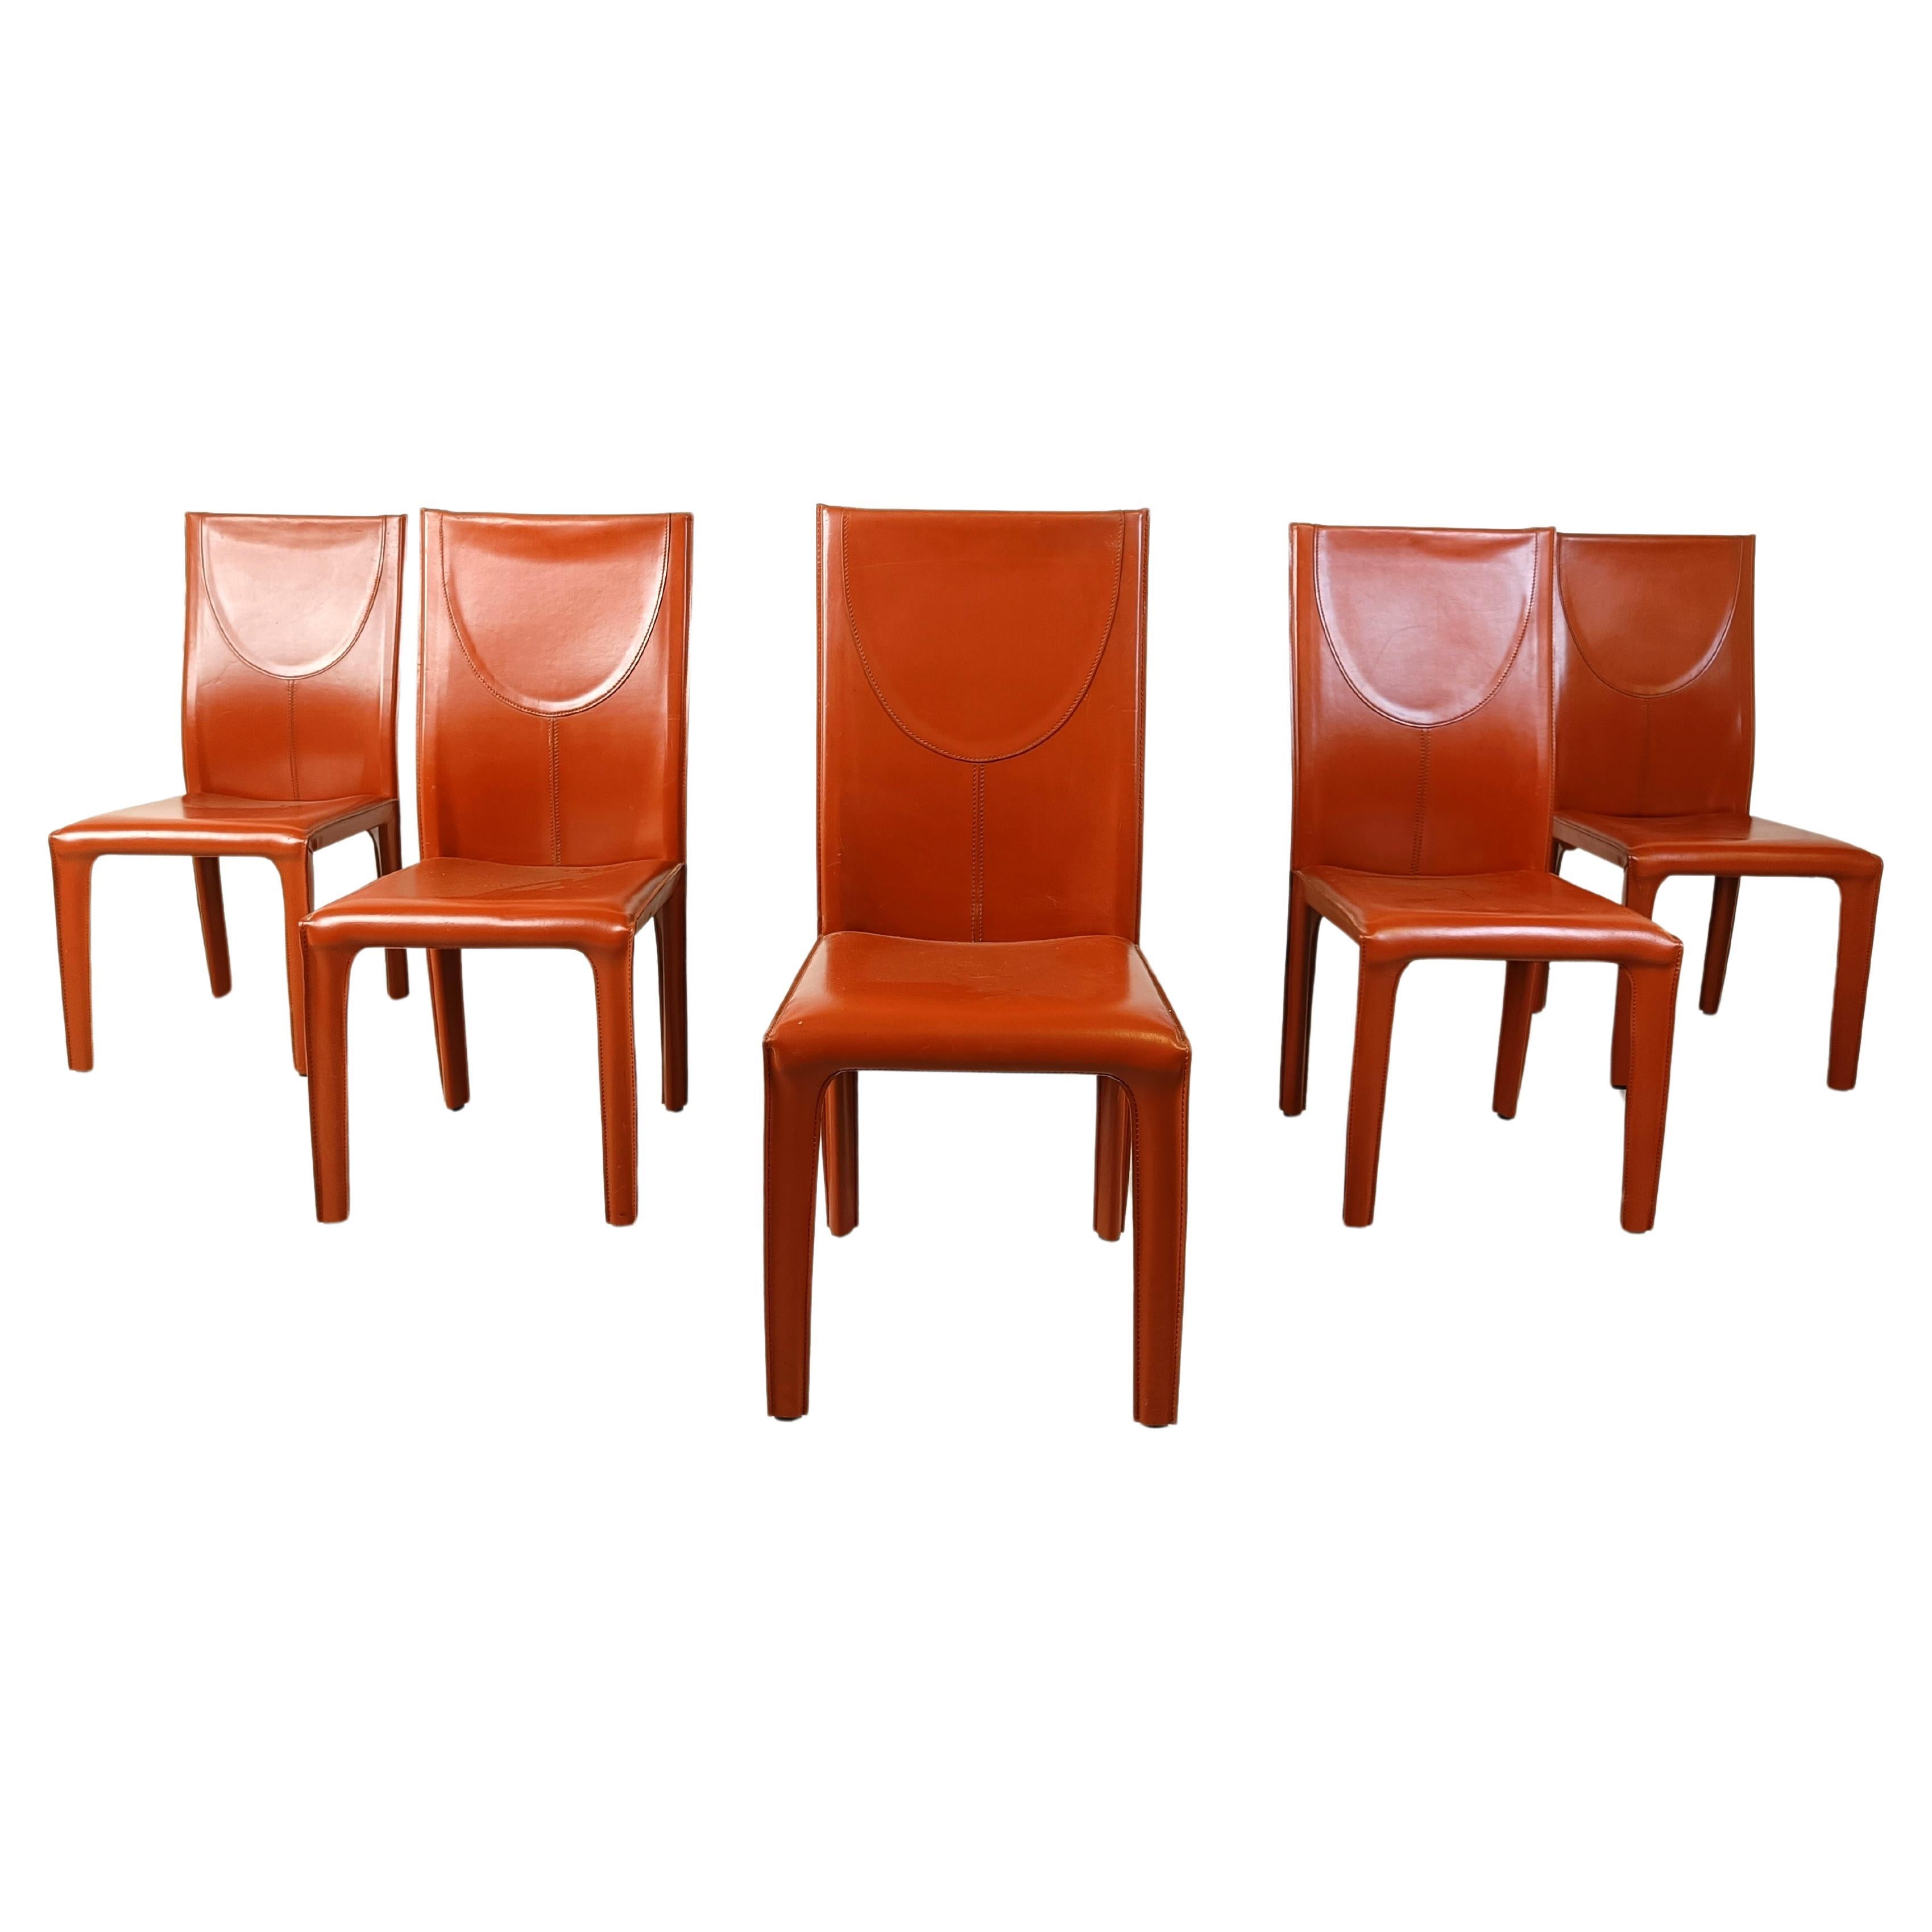 Red leather dining chairs by Arper italy, 1980s - set of 6 For Sale